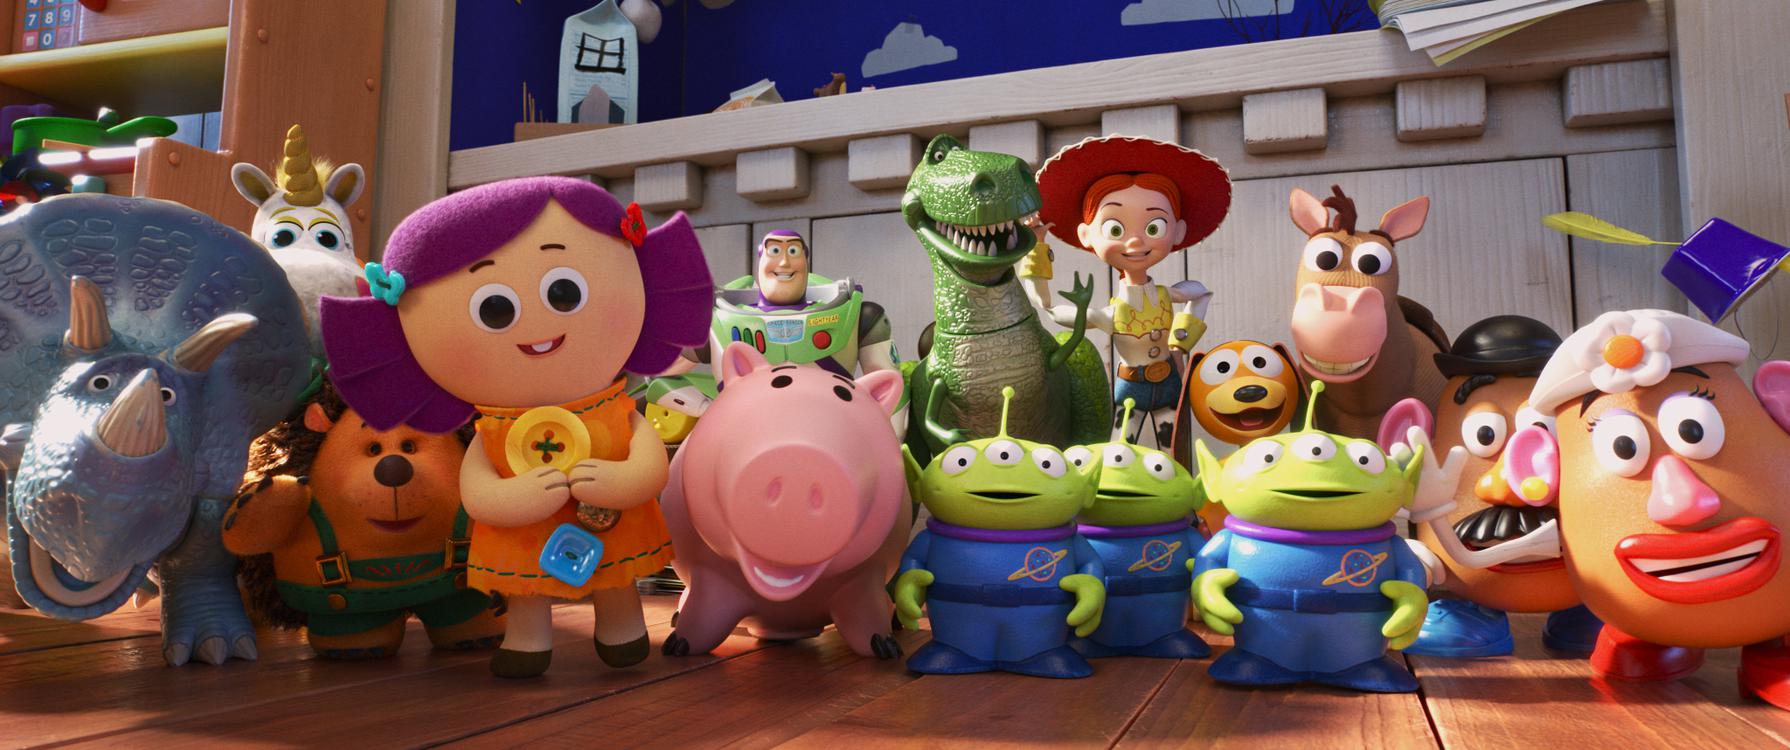 Toy-Story-4-OV- st 13 jpg sd-low ©2019-Disney-Pixar-All-Rights-Reserved